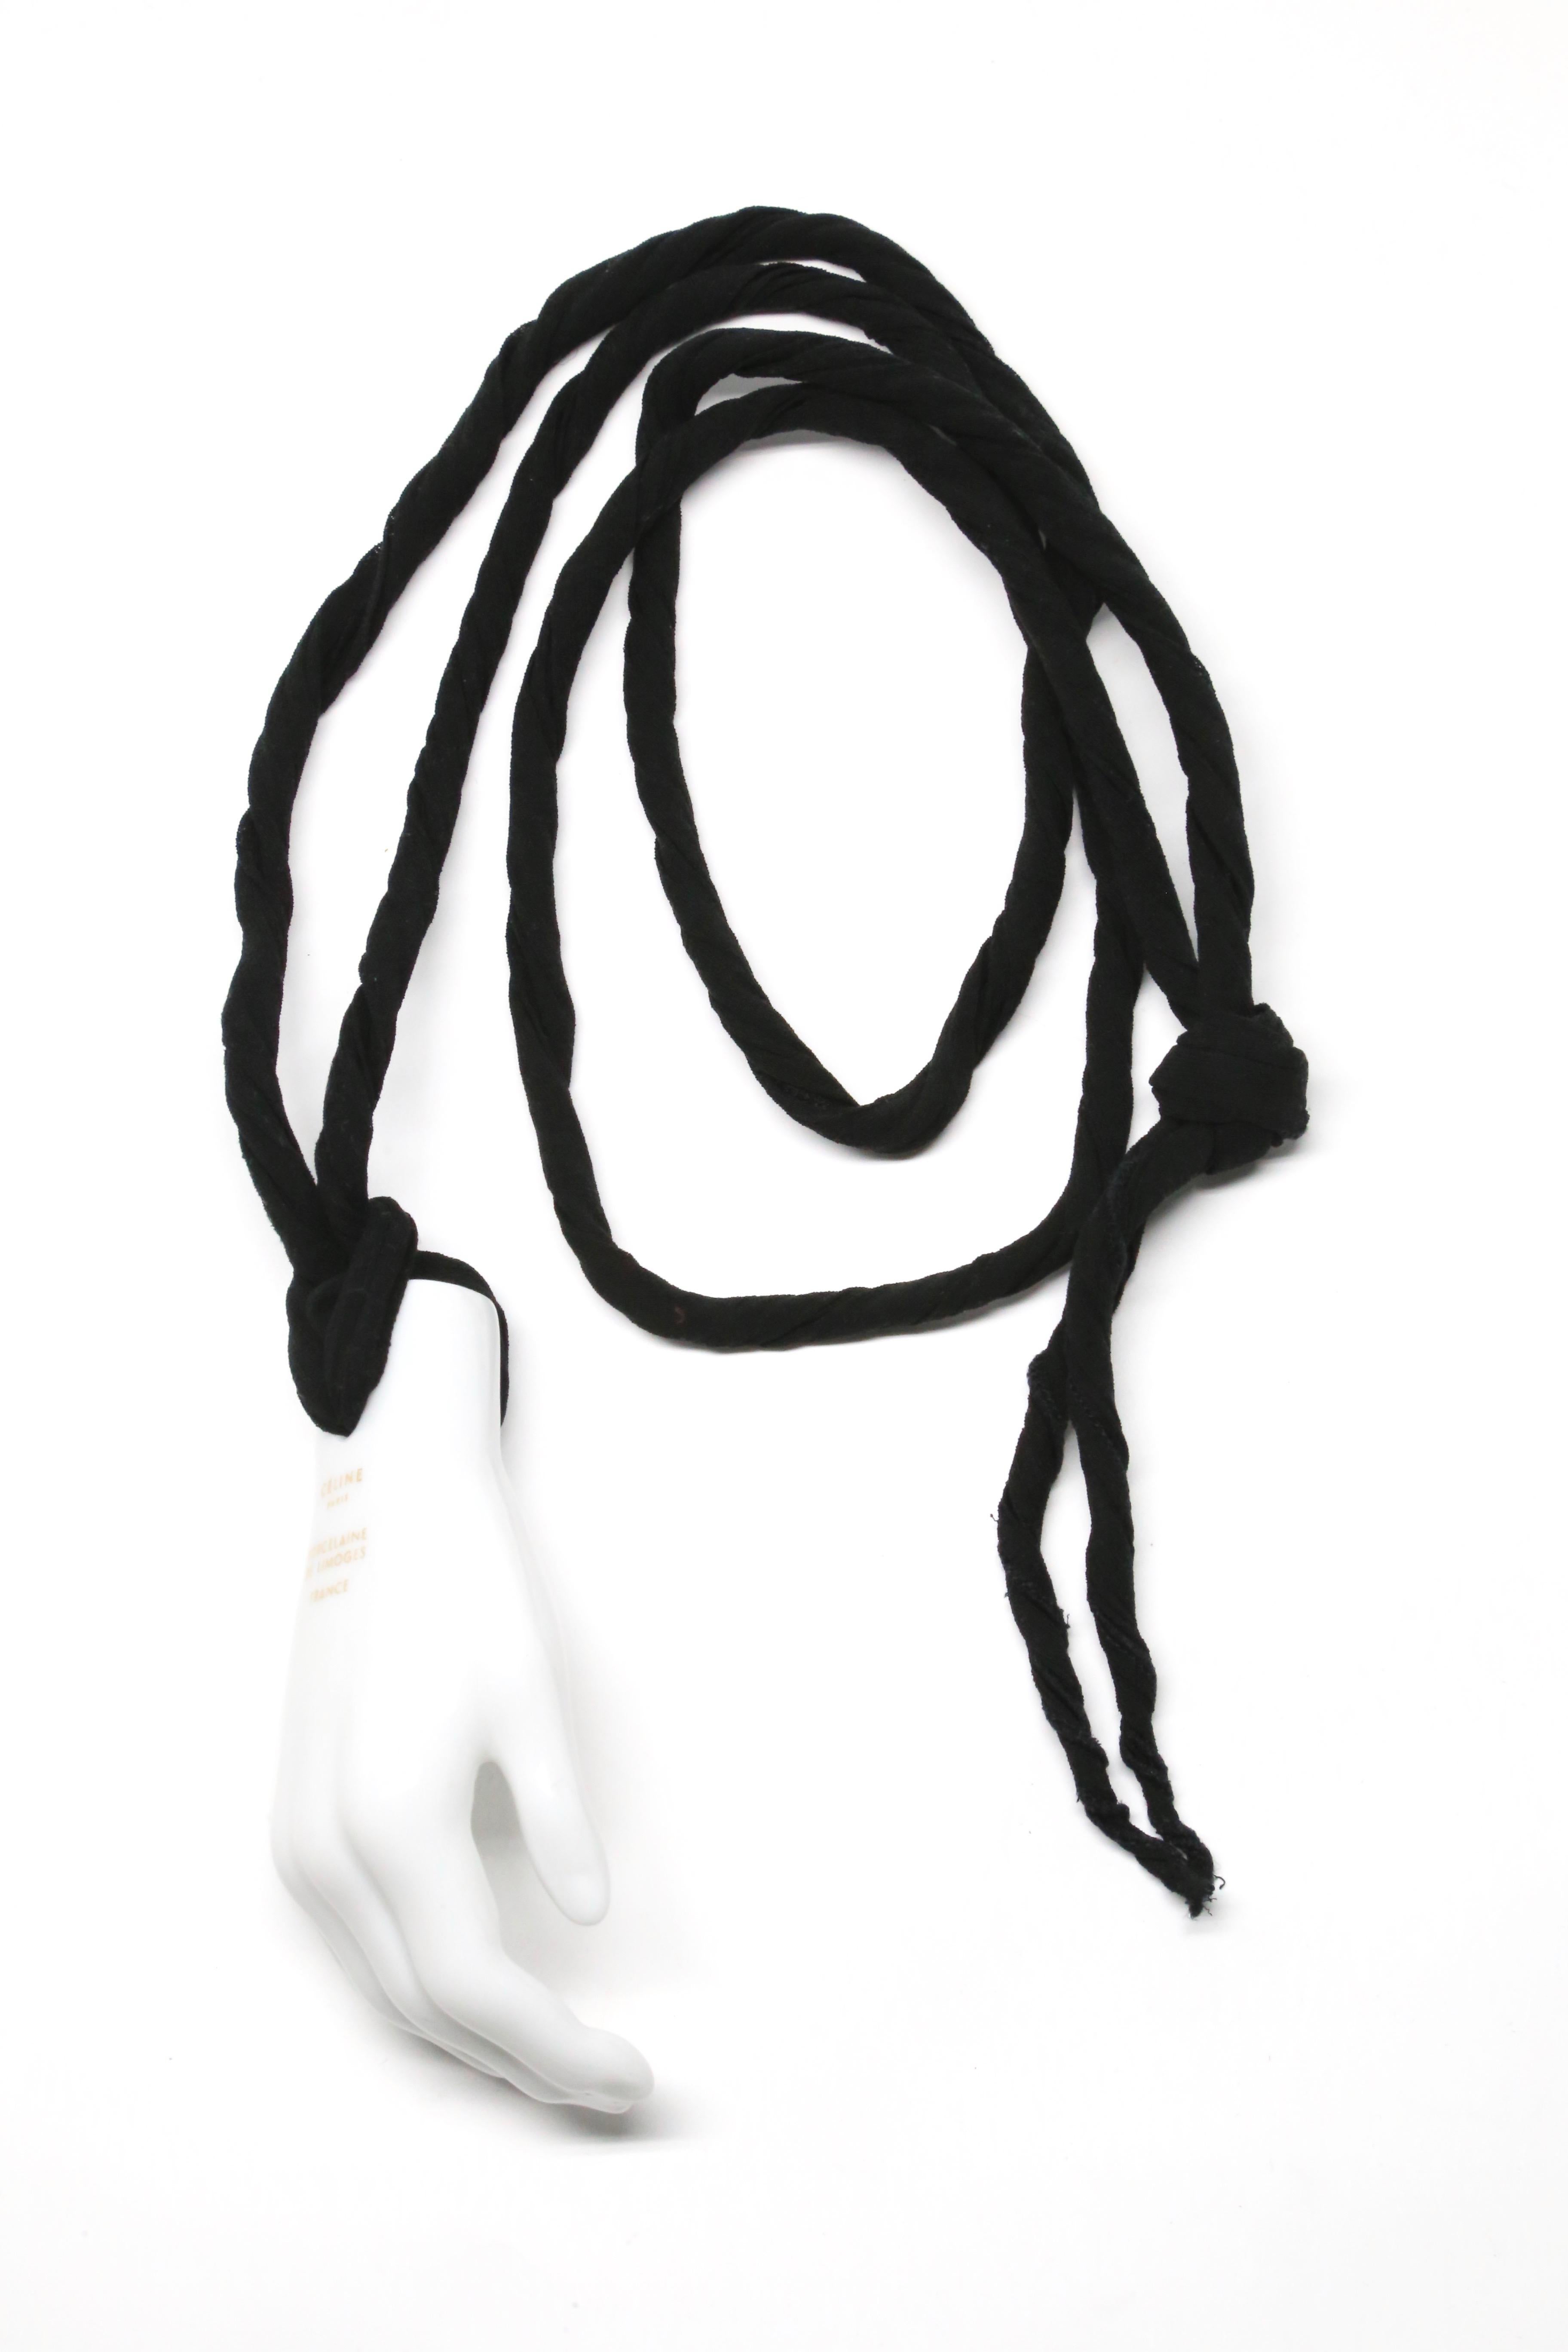 Very rare, white porcelain, surrealist 'hand' pendant necklace on long silk cord designed by Phoebe Philo for Celine exactly as seen on the spring 2014 runway. Manufactured by Porcelaine De Limoges France for Celine. Approximate measurements: